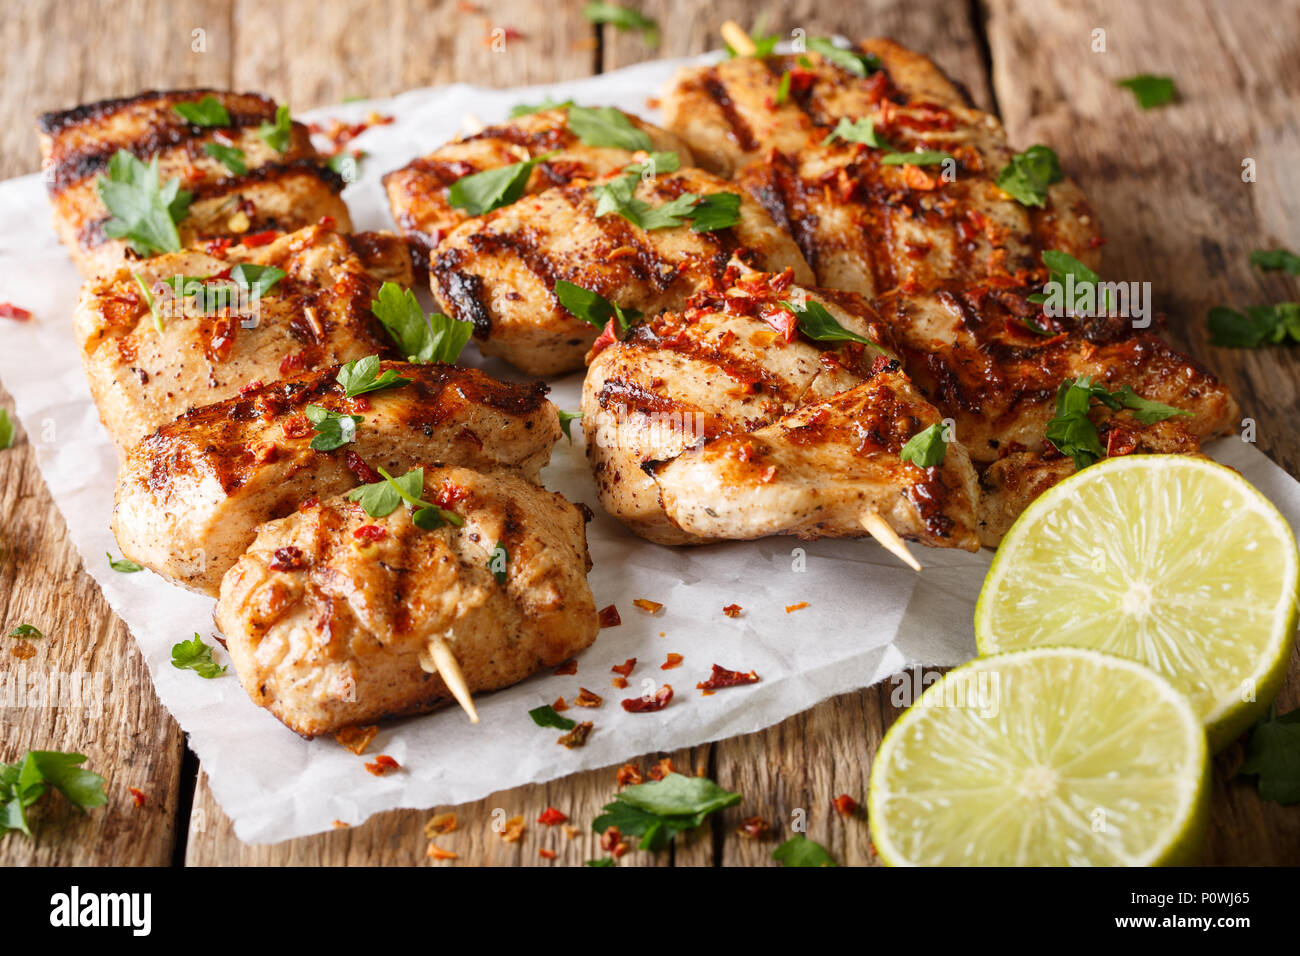 Afghanistan's barbecue: grilled chicken skewers Kebab e Murgh close-up on paper on a table. horizontal Stock Photo